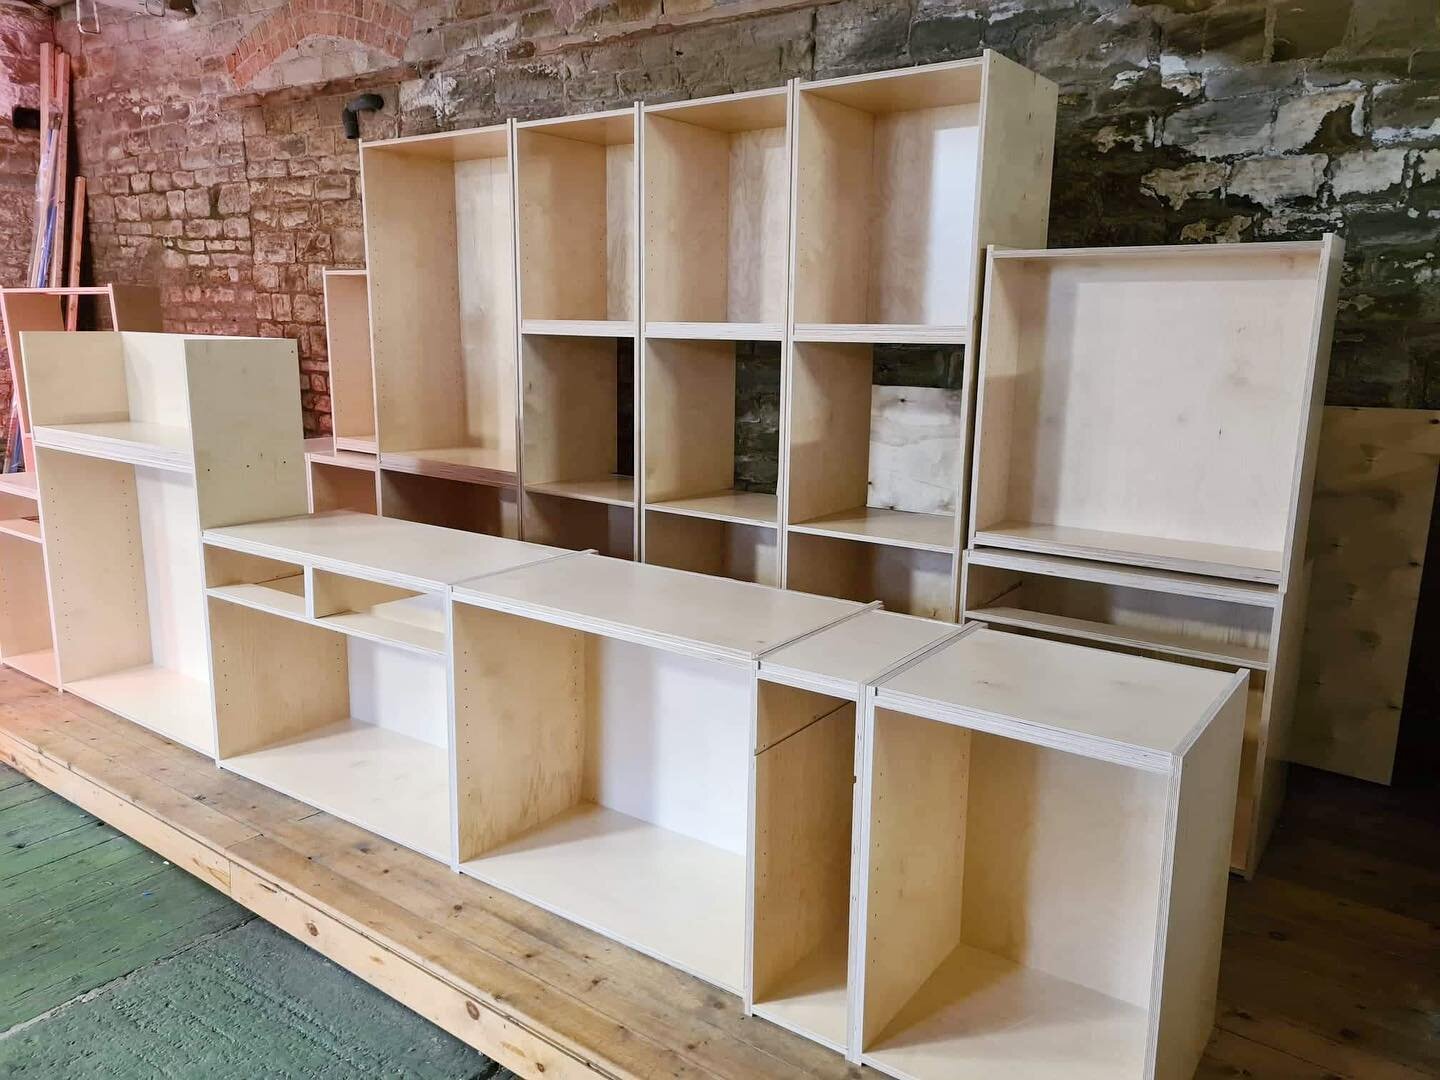 Happy Easter! 🐣❤️

A new client project is hatching.. this weeks birch ply cabinets ready for frames, doors and drawers. Complete cabinets coming up. 👀

www.framedkitchens.co.uk
.
#kitchendesign #cabinet #joinery #yorkshire #leeds #bespoke #furnitu